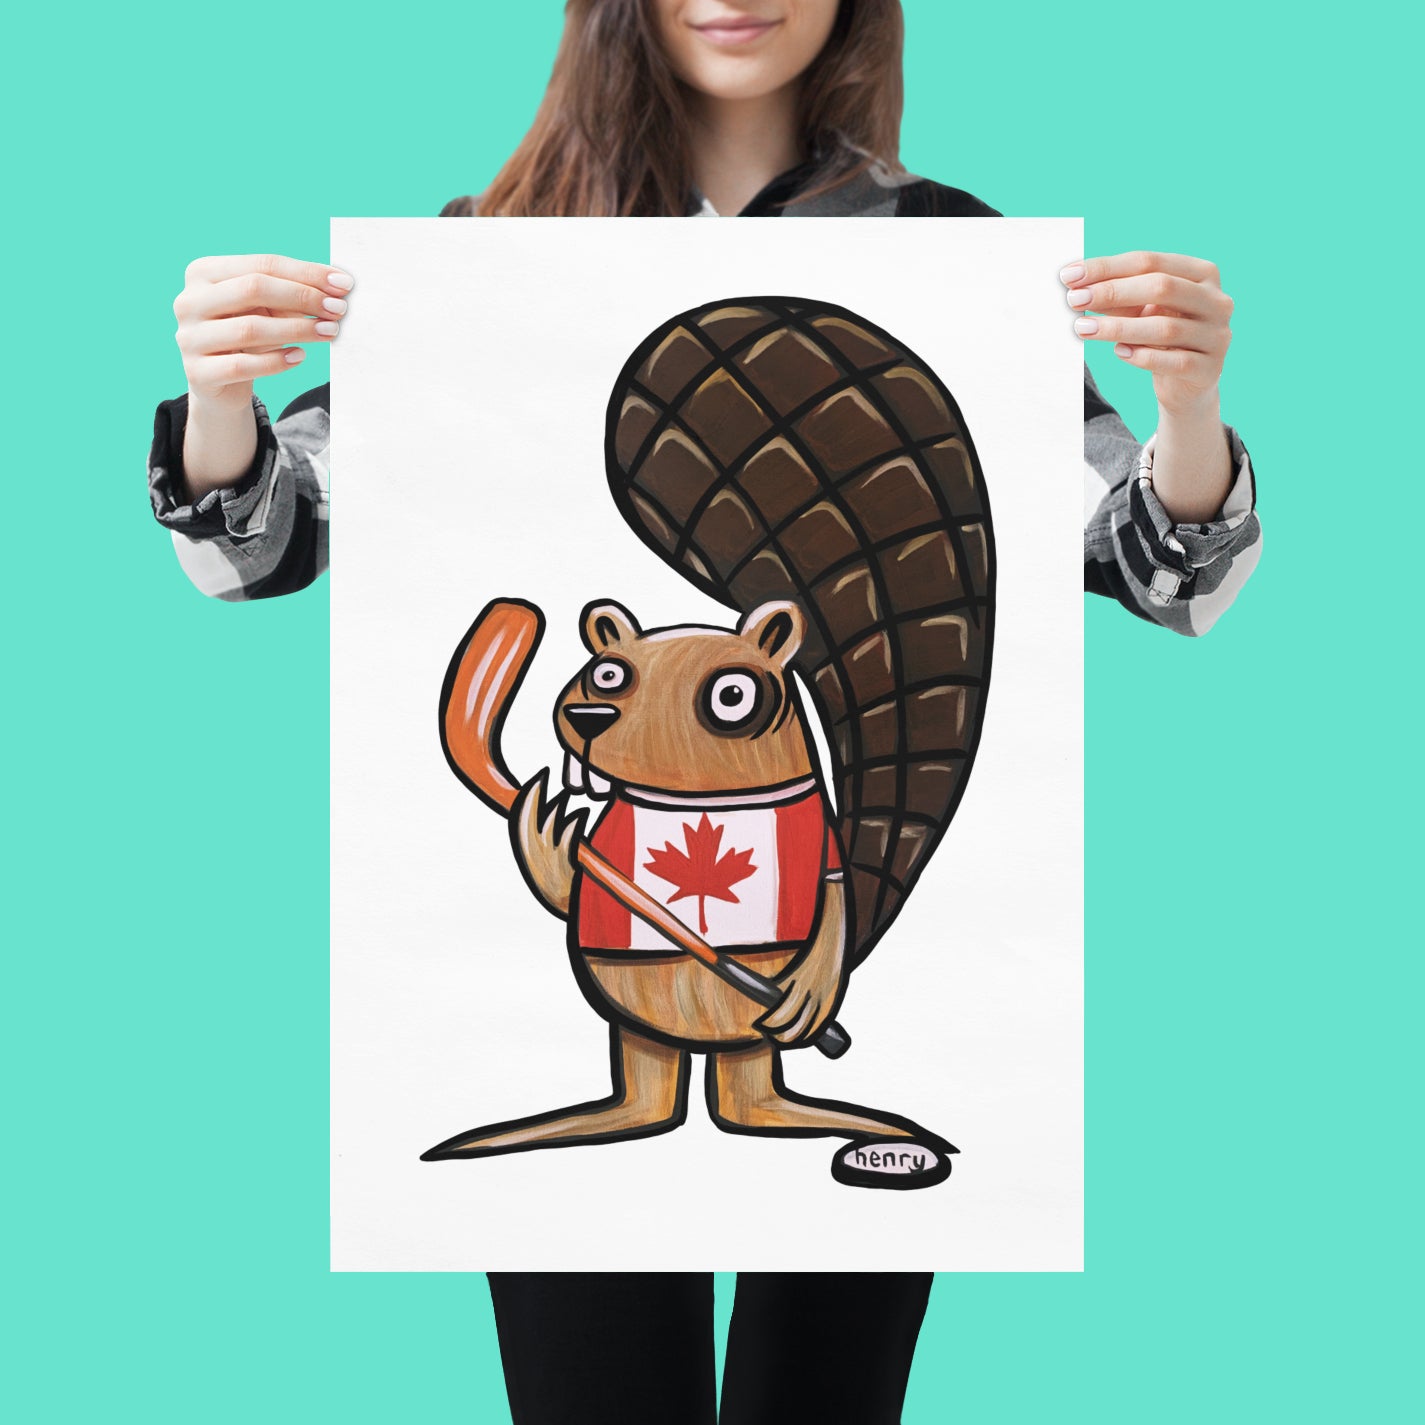 Hockey Beaver Print Art Poster for wall decor features Original Painting by Seattle Mural Artist Henry